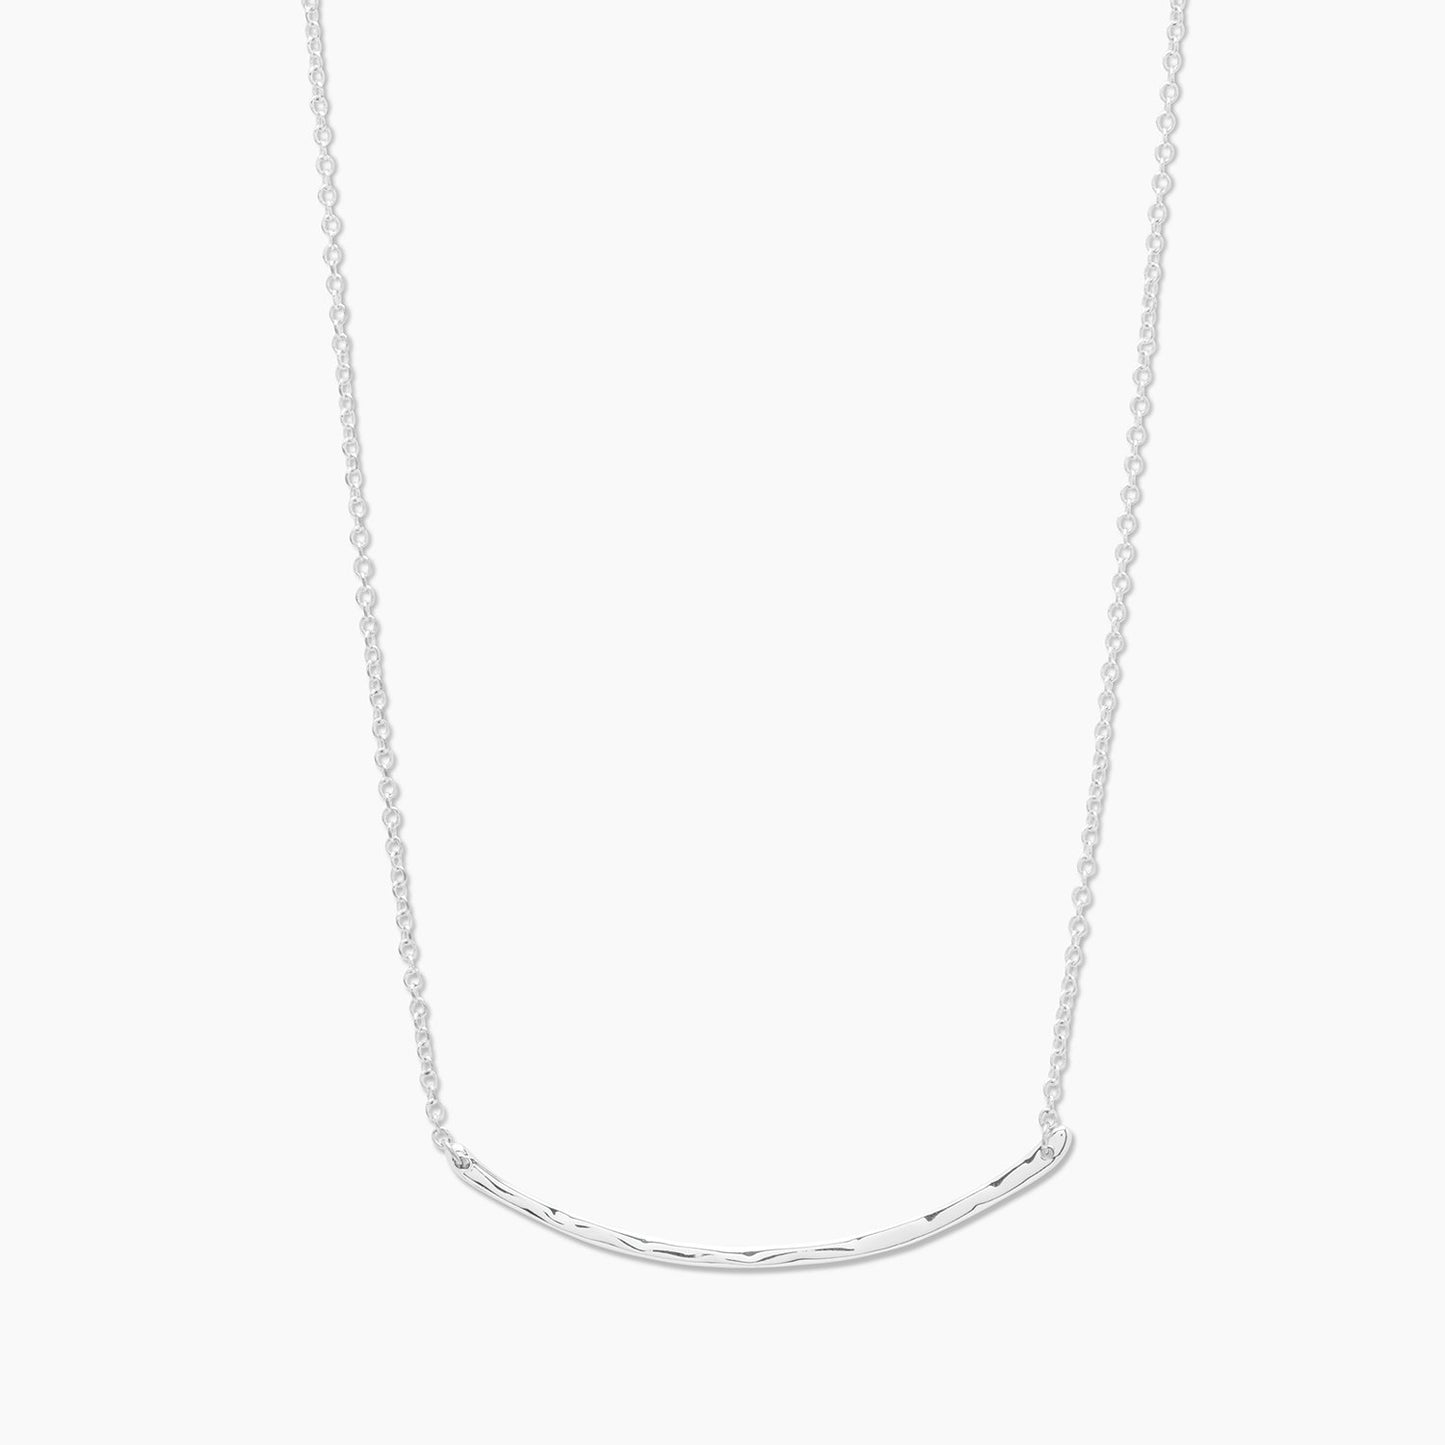 Gorjana Taner Bar Small Necklace available at The Good Life Boutique